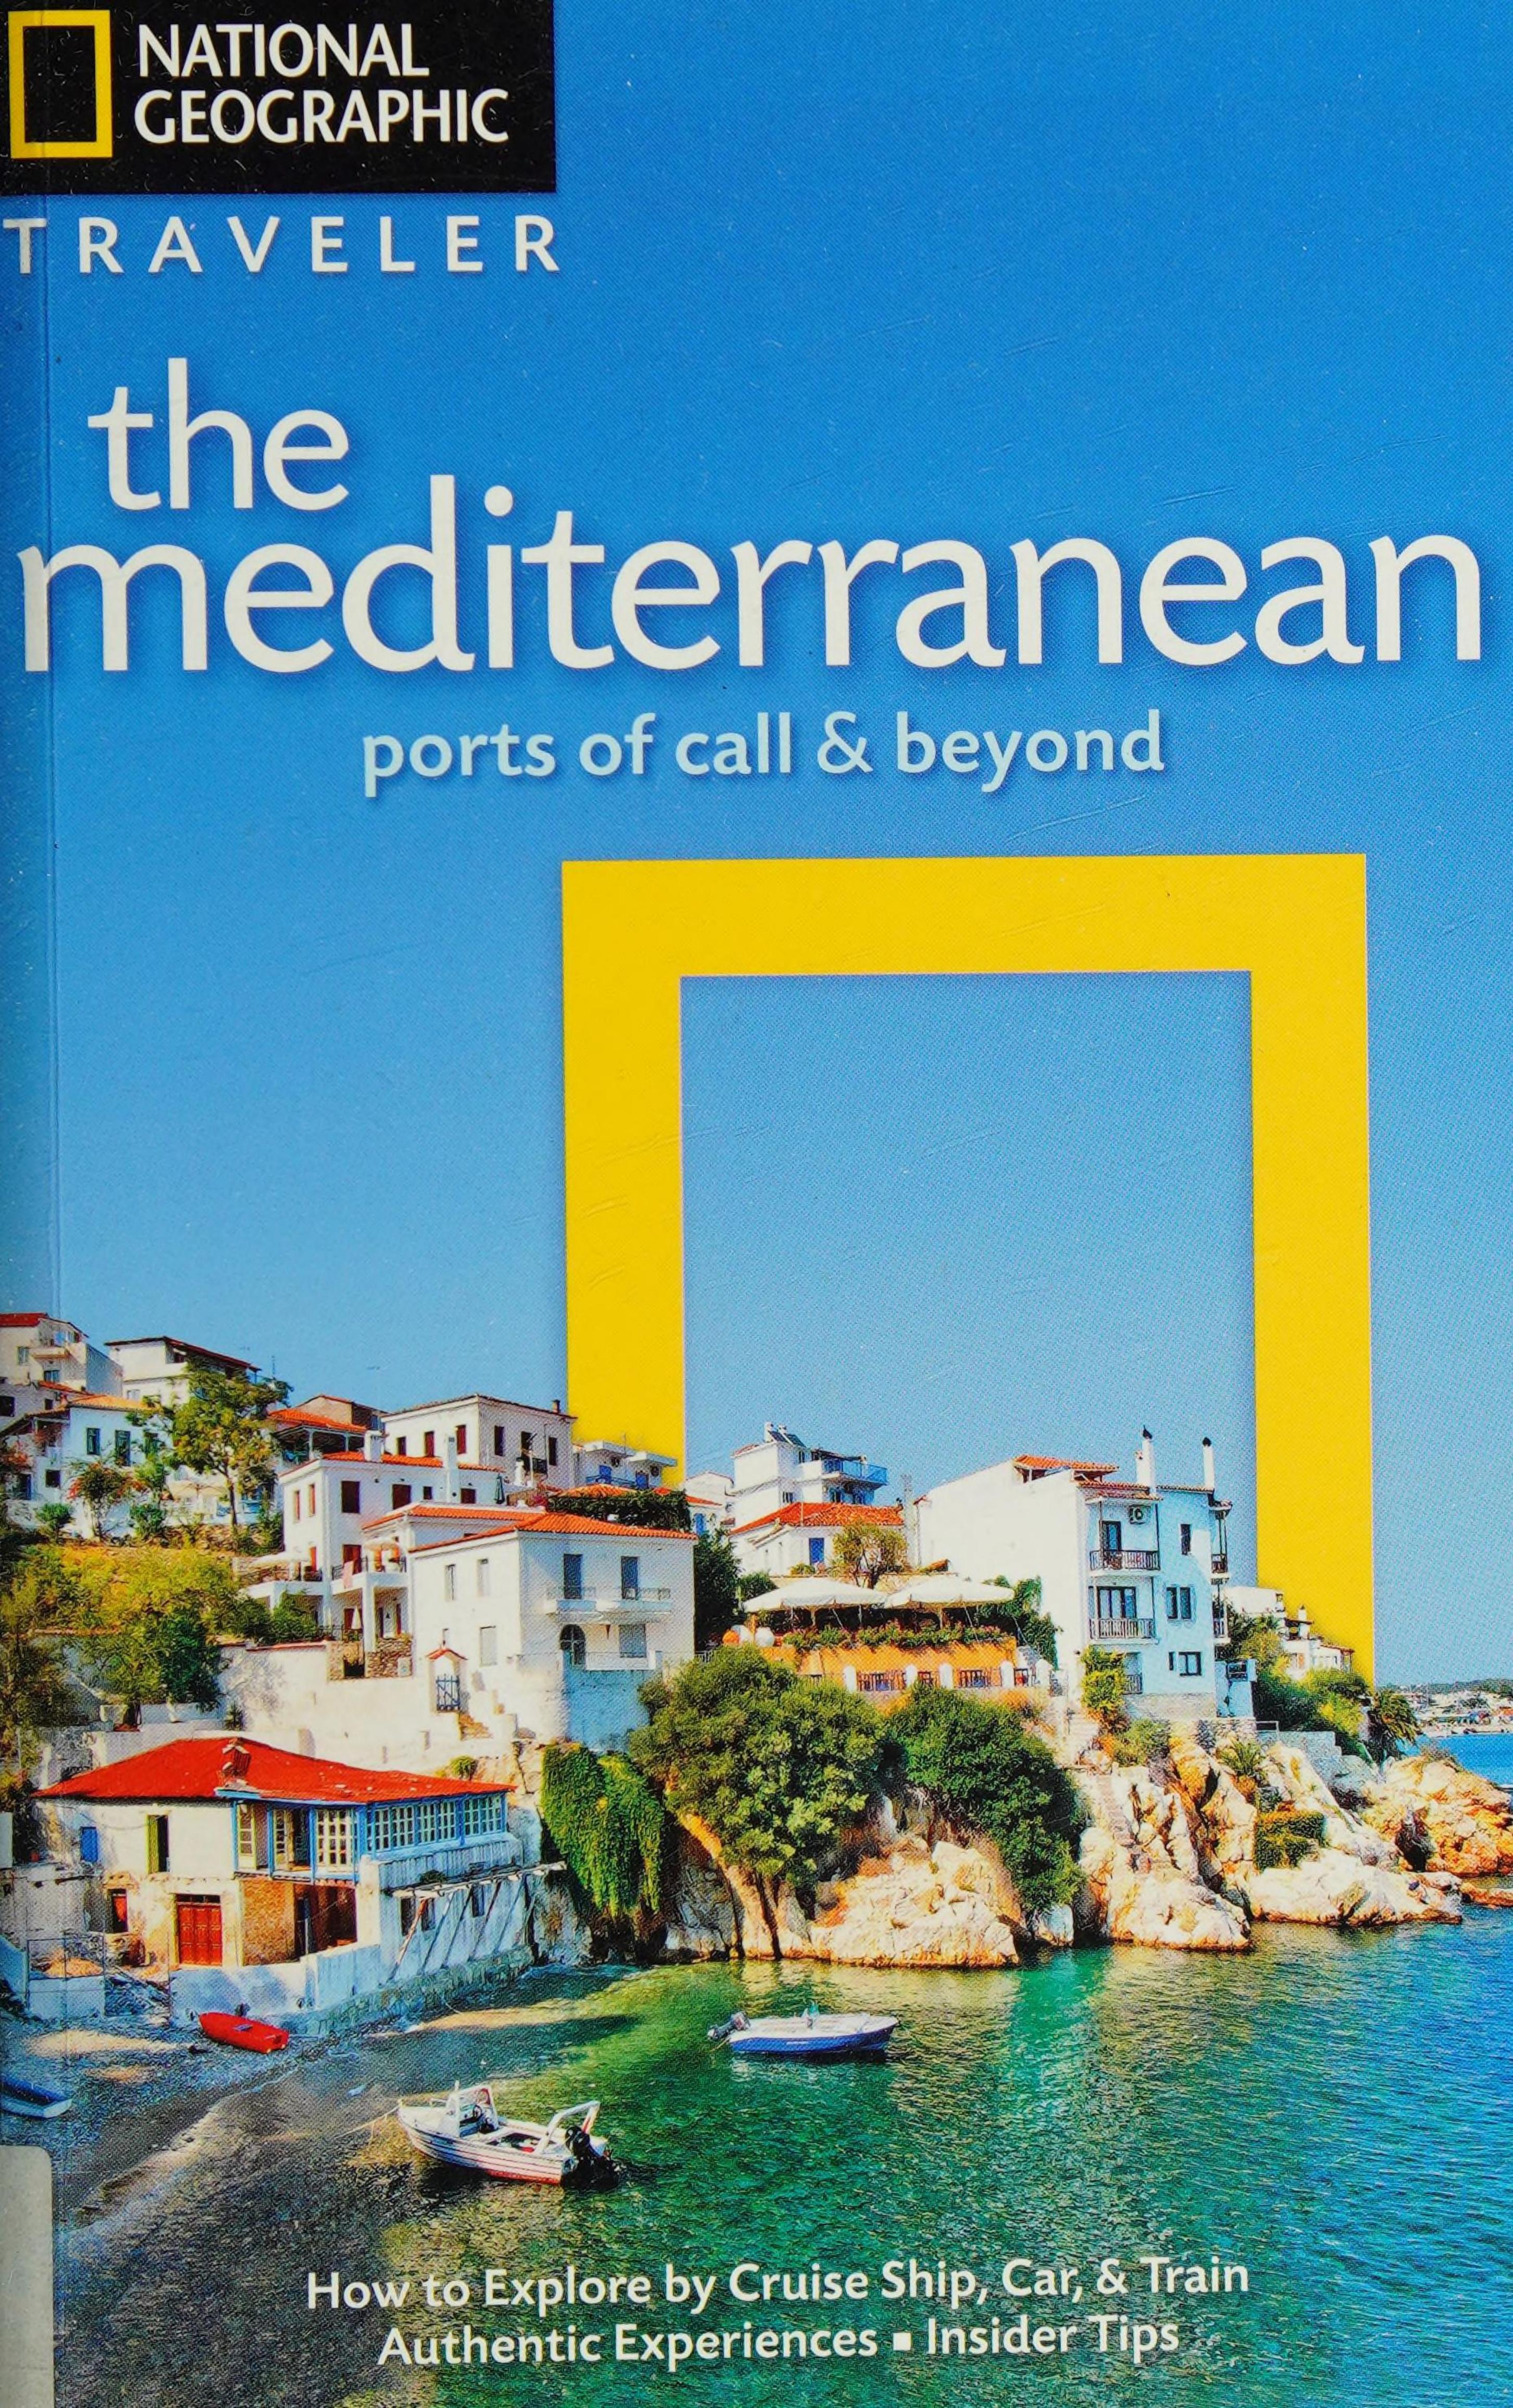 National Geographic Traveler: The Mediterranean: Ports of Call and Beyond by Tim Jepson